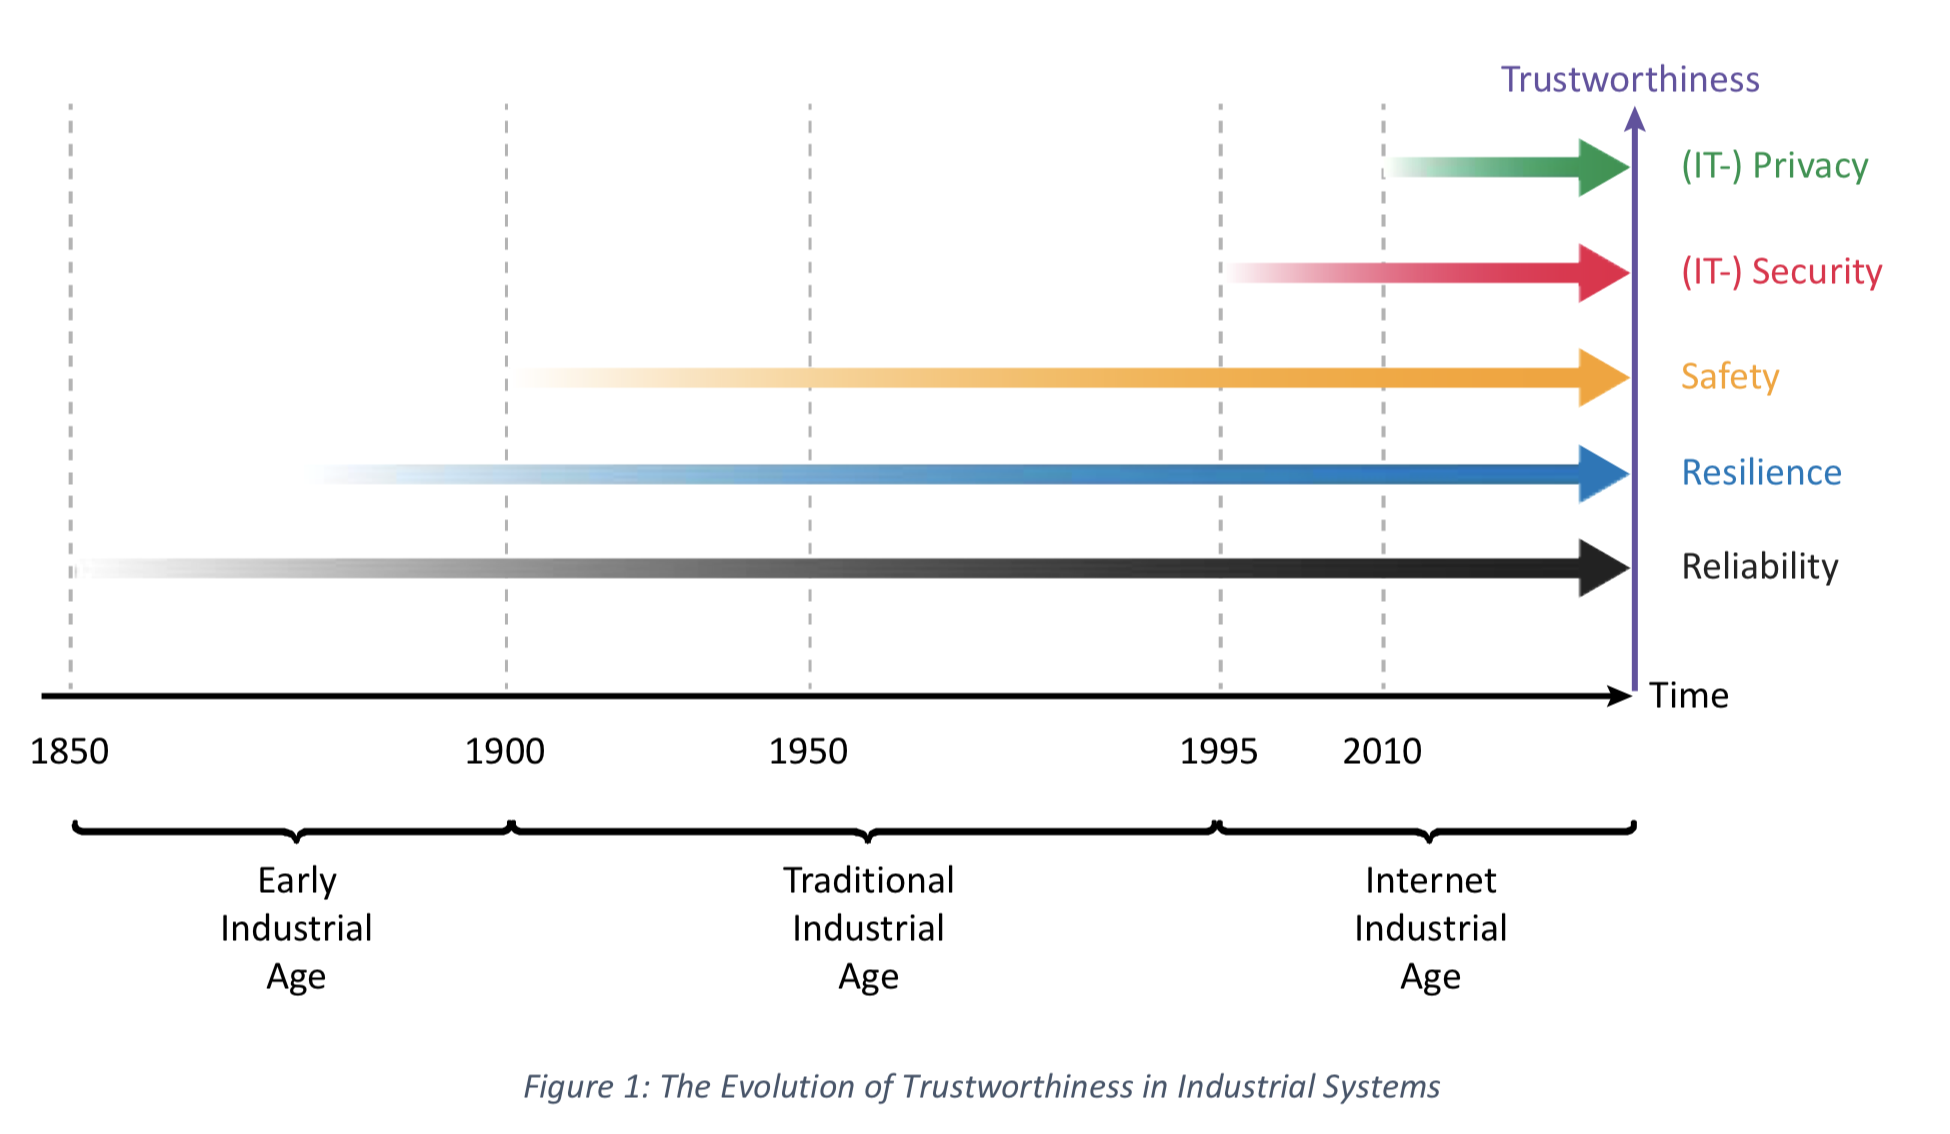 The evolution of Trustworthiness in Industrial Systems